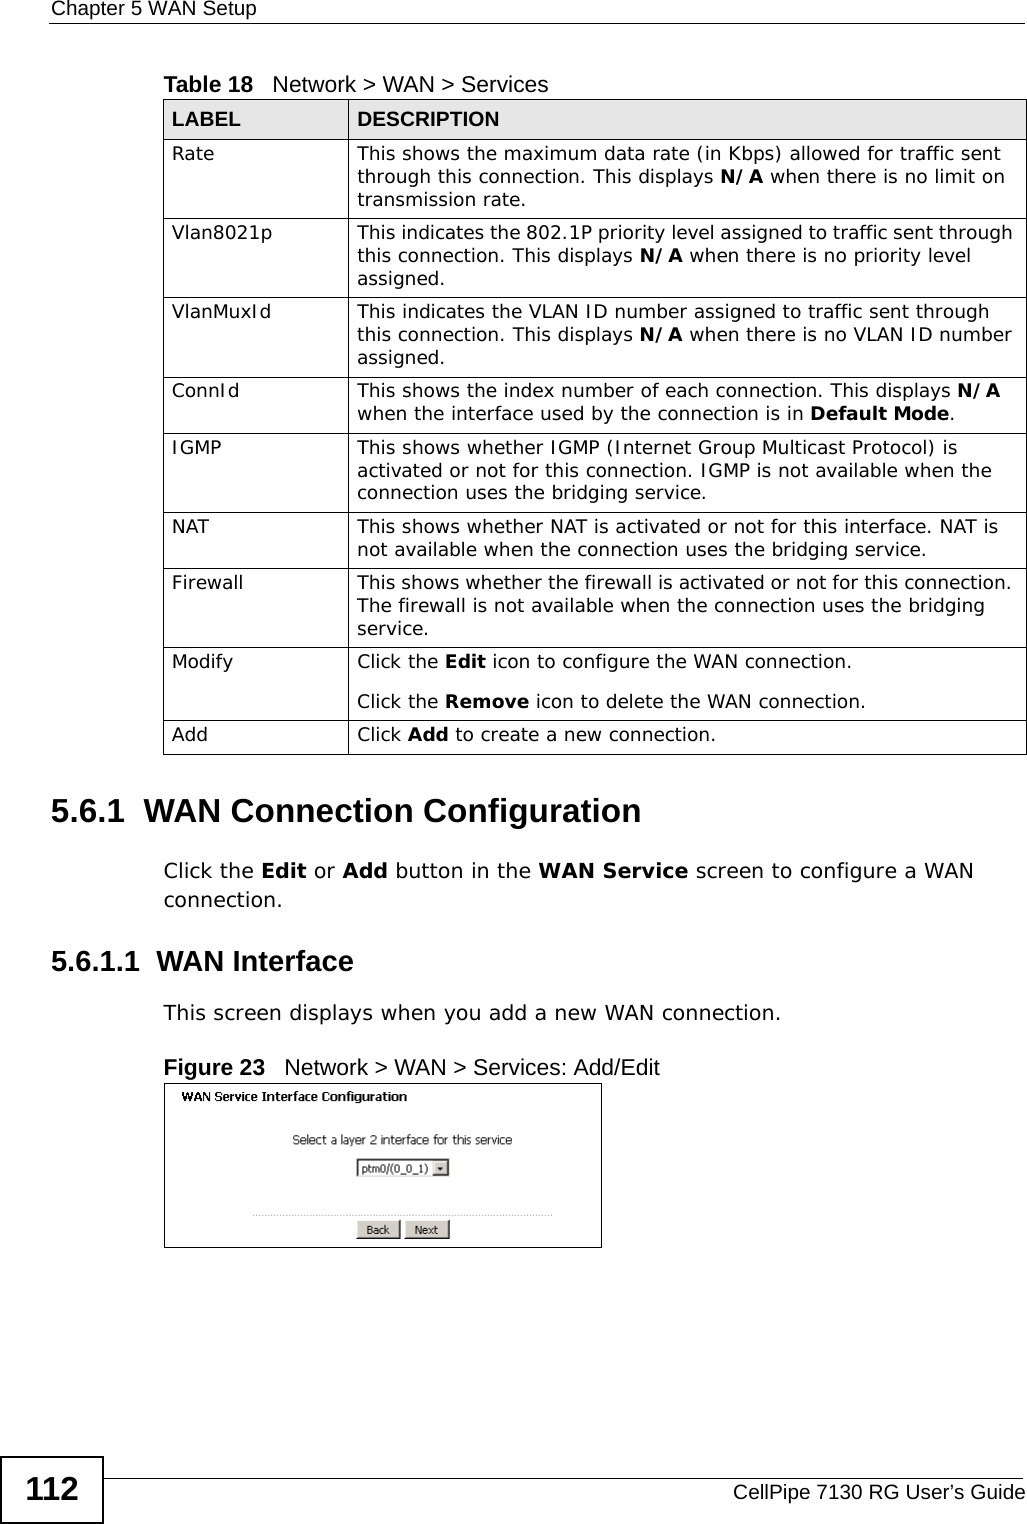 Chapter 5 WAN SetupCellPipe 7130 RG User’s Guide1125.6.1  WAN Connection ConfigurationClick the Edit or Add button in the WAN Service screen to configure a WAN connection. 5.6.1.1  WAN InterfaceThis screen displays when you add a new WAN connection.Figure 23   Network &gt; WAN &gt; Services: Add/Edit Rate This shows the maximum data rate (in Kbps) allowed for traffic sent through this connection. This displays N/A when there is no limit on transmission rate.Vlan8021p This indicates the 802.1P priority level assigned to traffic sent through this connection. This displays N/A when there is no priority level assigned.VlanMuxId This indicates the VLAN ID number assigned to traffic sent through this connection. This displays N/A when there is no VLAN ID number assigned.ConnId This shows the index number of each connection. This displays N/A when the interface used by the connection is in Default Mode.IGMP This shows whether IGMP (Internet Group Multicast Protocol) is activated or not for this connection. IGMP is not available when the connection uses the bridging service.NAT This shows whether NAT is activated or not for this interface. NAT is not available when the connection uses the bridging service.Firewall This shows whether the firewall is activated or not for this connection. The firewall is not available when the connection uses the bridging service.Modify Click the Edit icon to configure the WAN connection.Click the Remove icon to delete the WAN connection.Add Click Add to create a new connection.Table 18   Network &gt; WAN &gt; ServicesLABEL DESCRIPTION